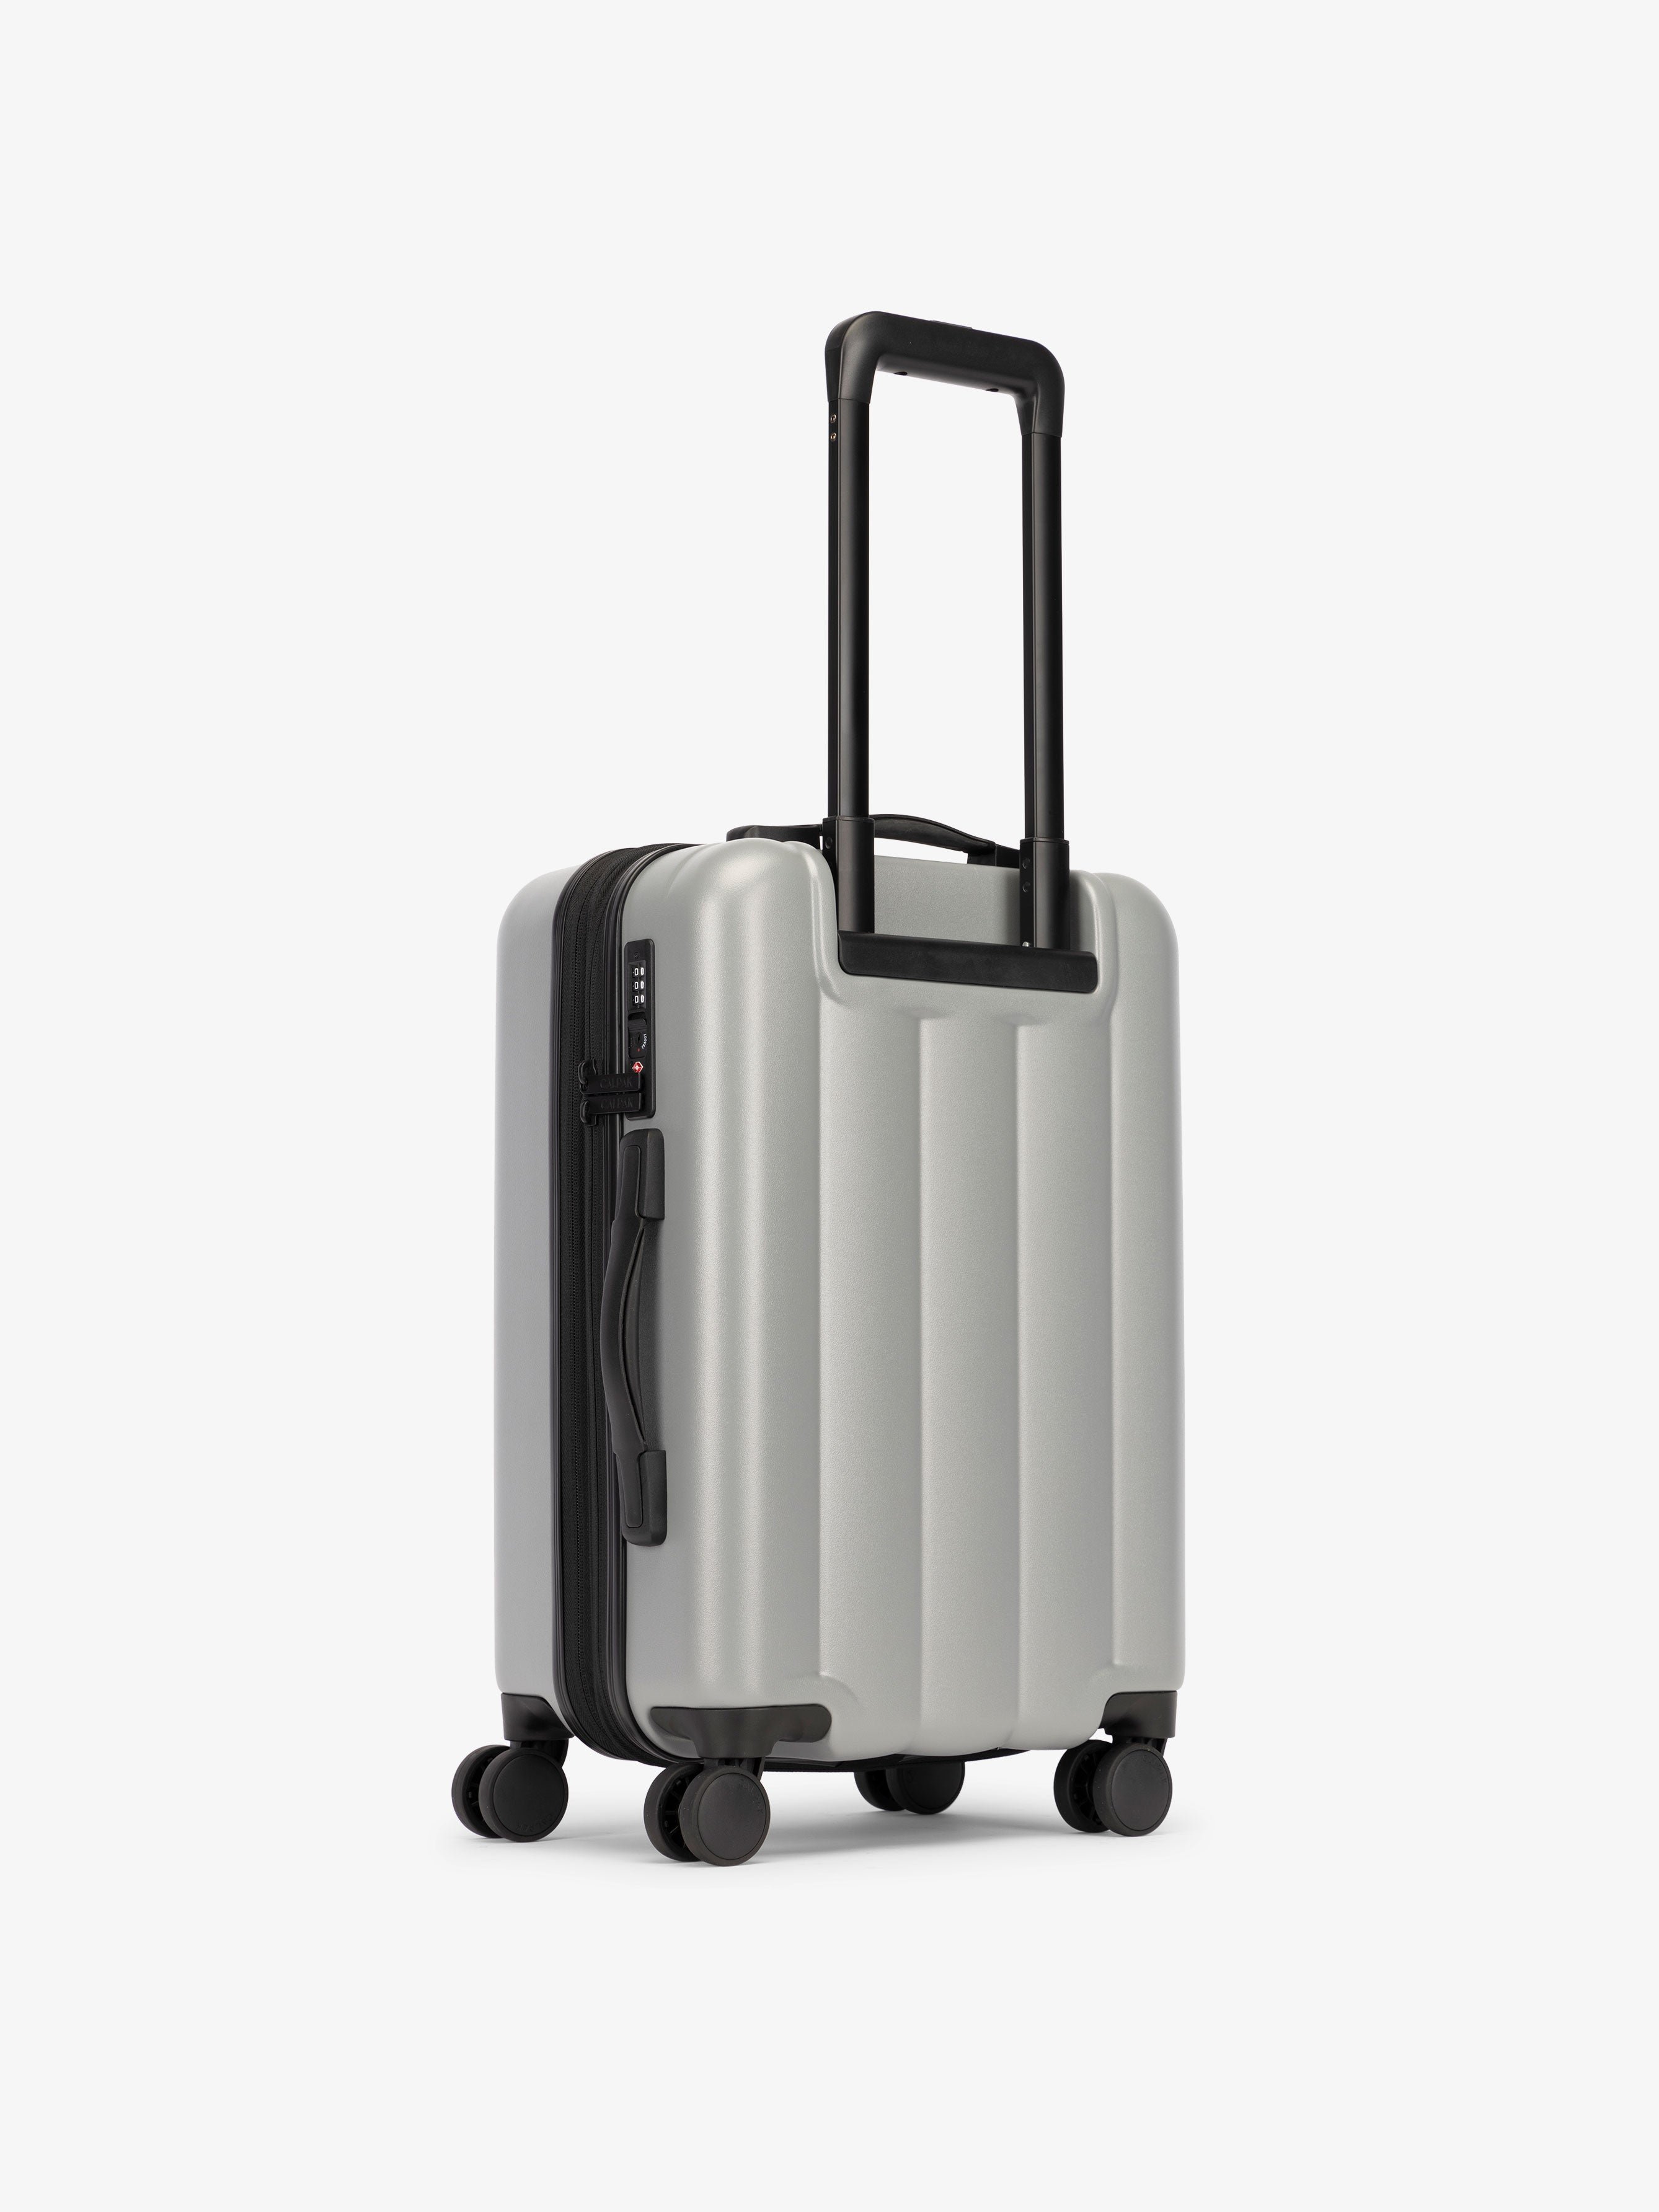 CALPAK carry-on luggage featuring dual spinner wheels and bottom grab handle in smoke